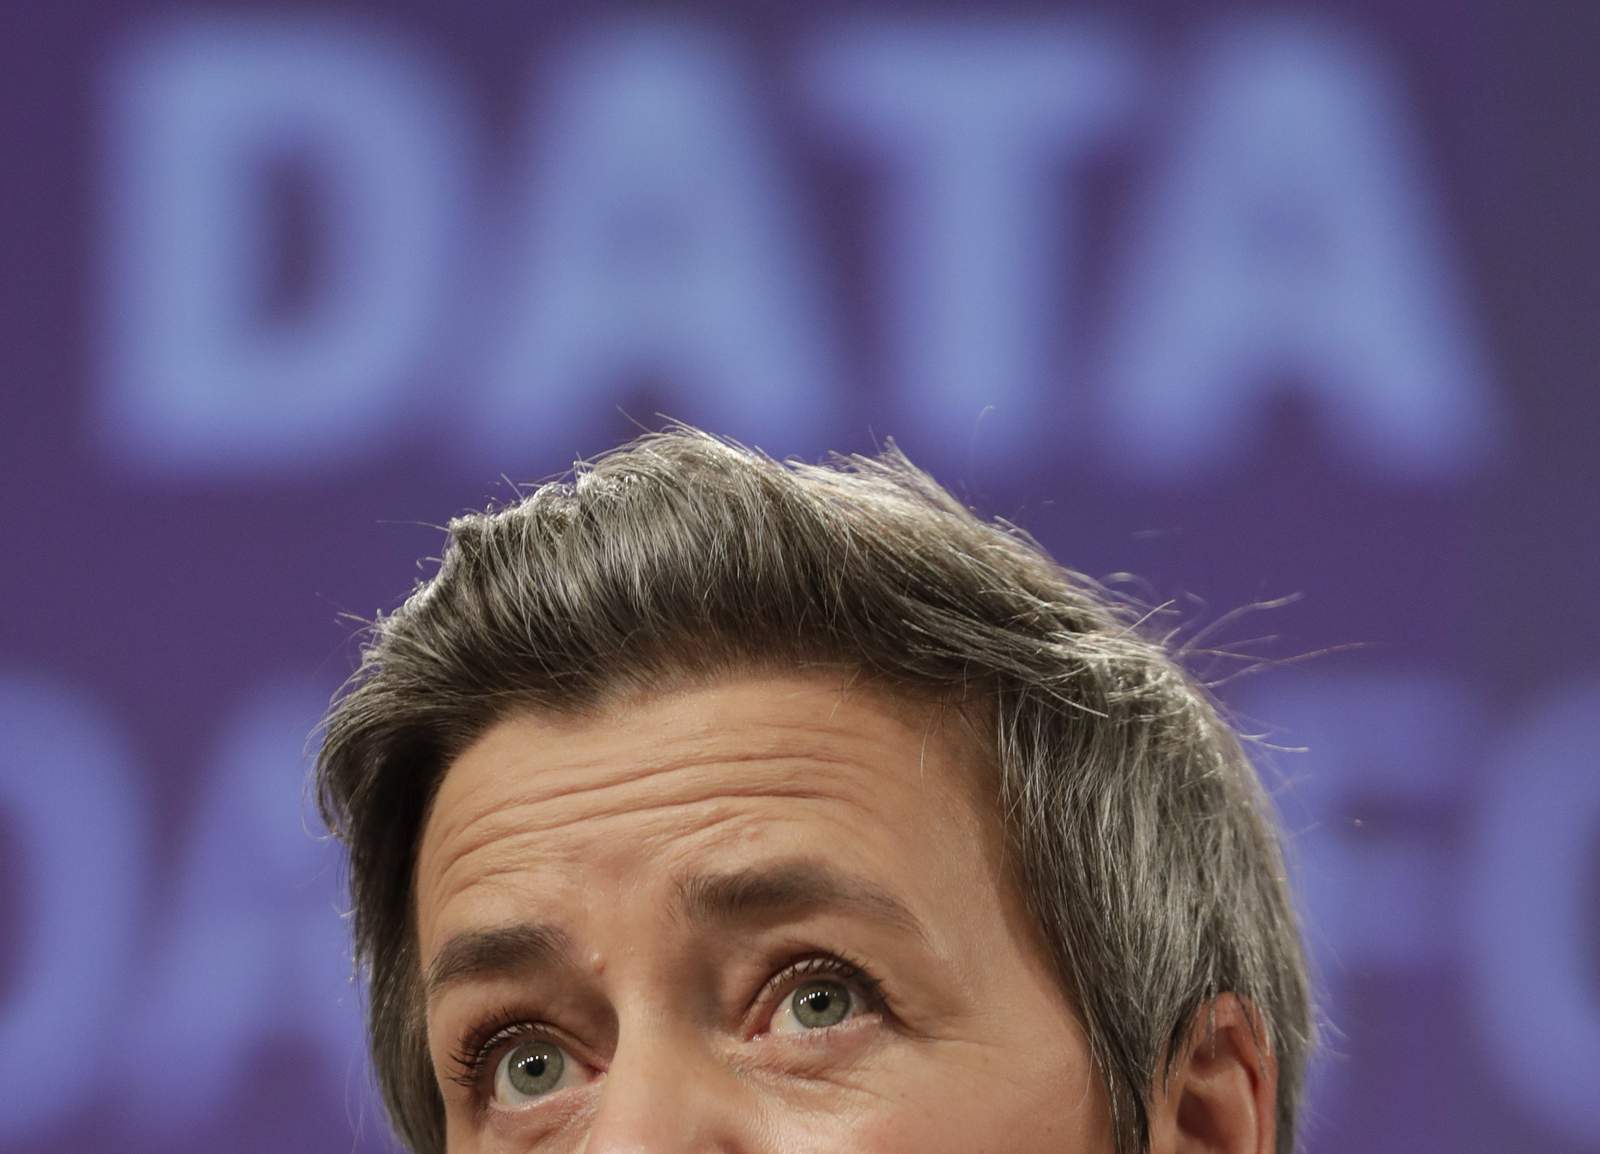 EU plans new rules giving Europeans more control of data